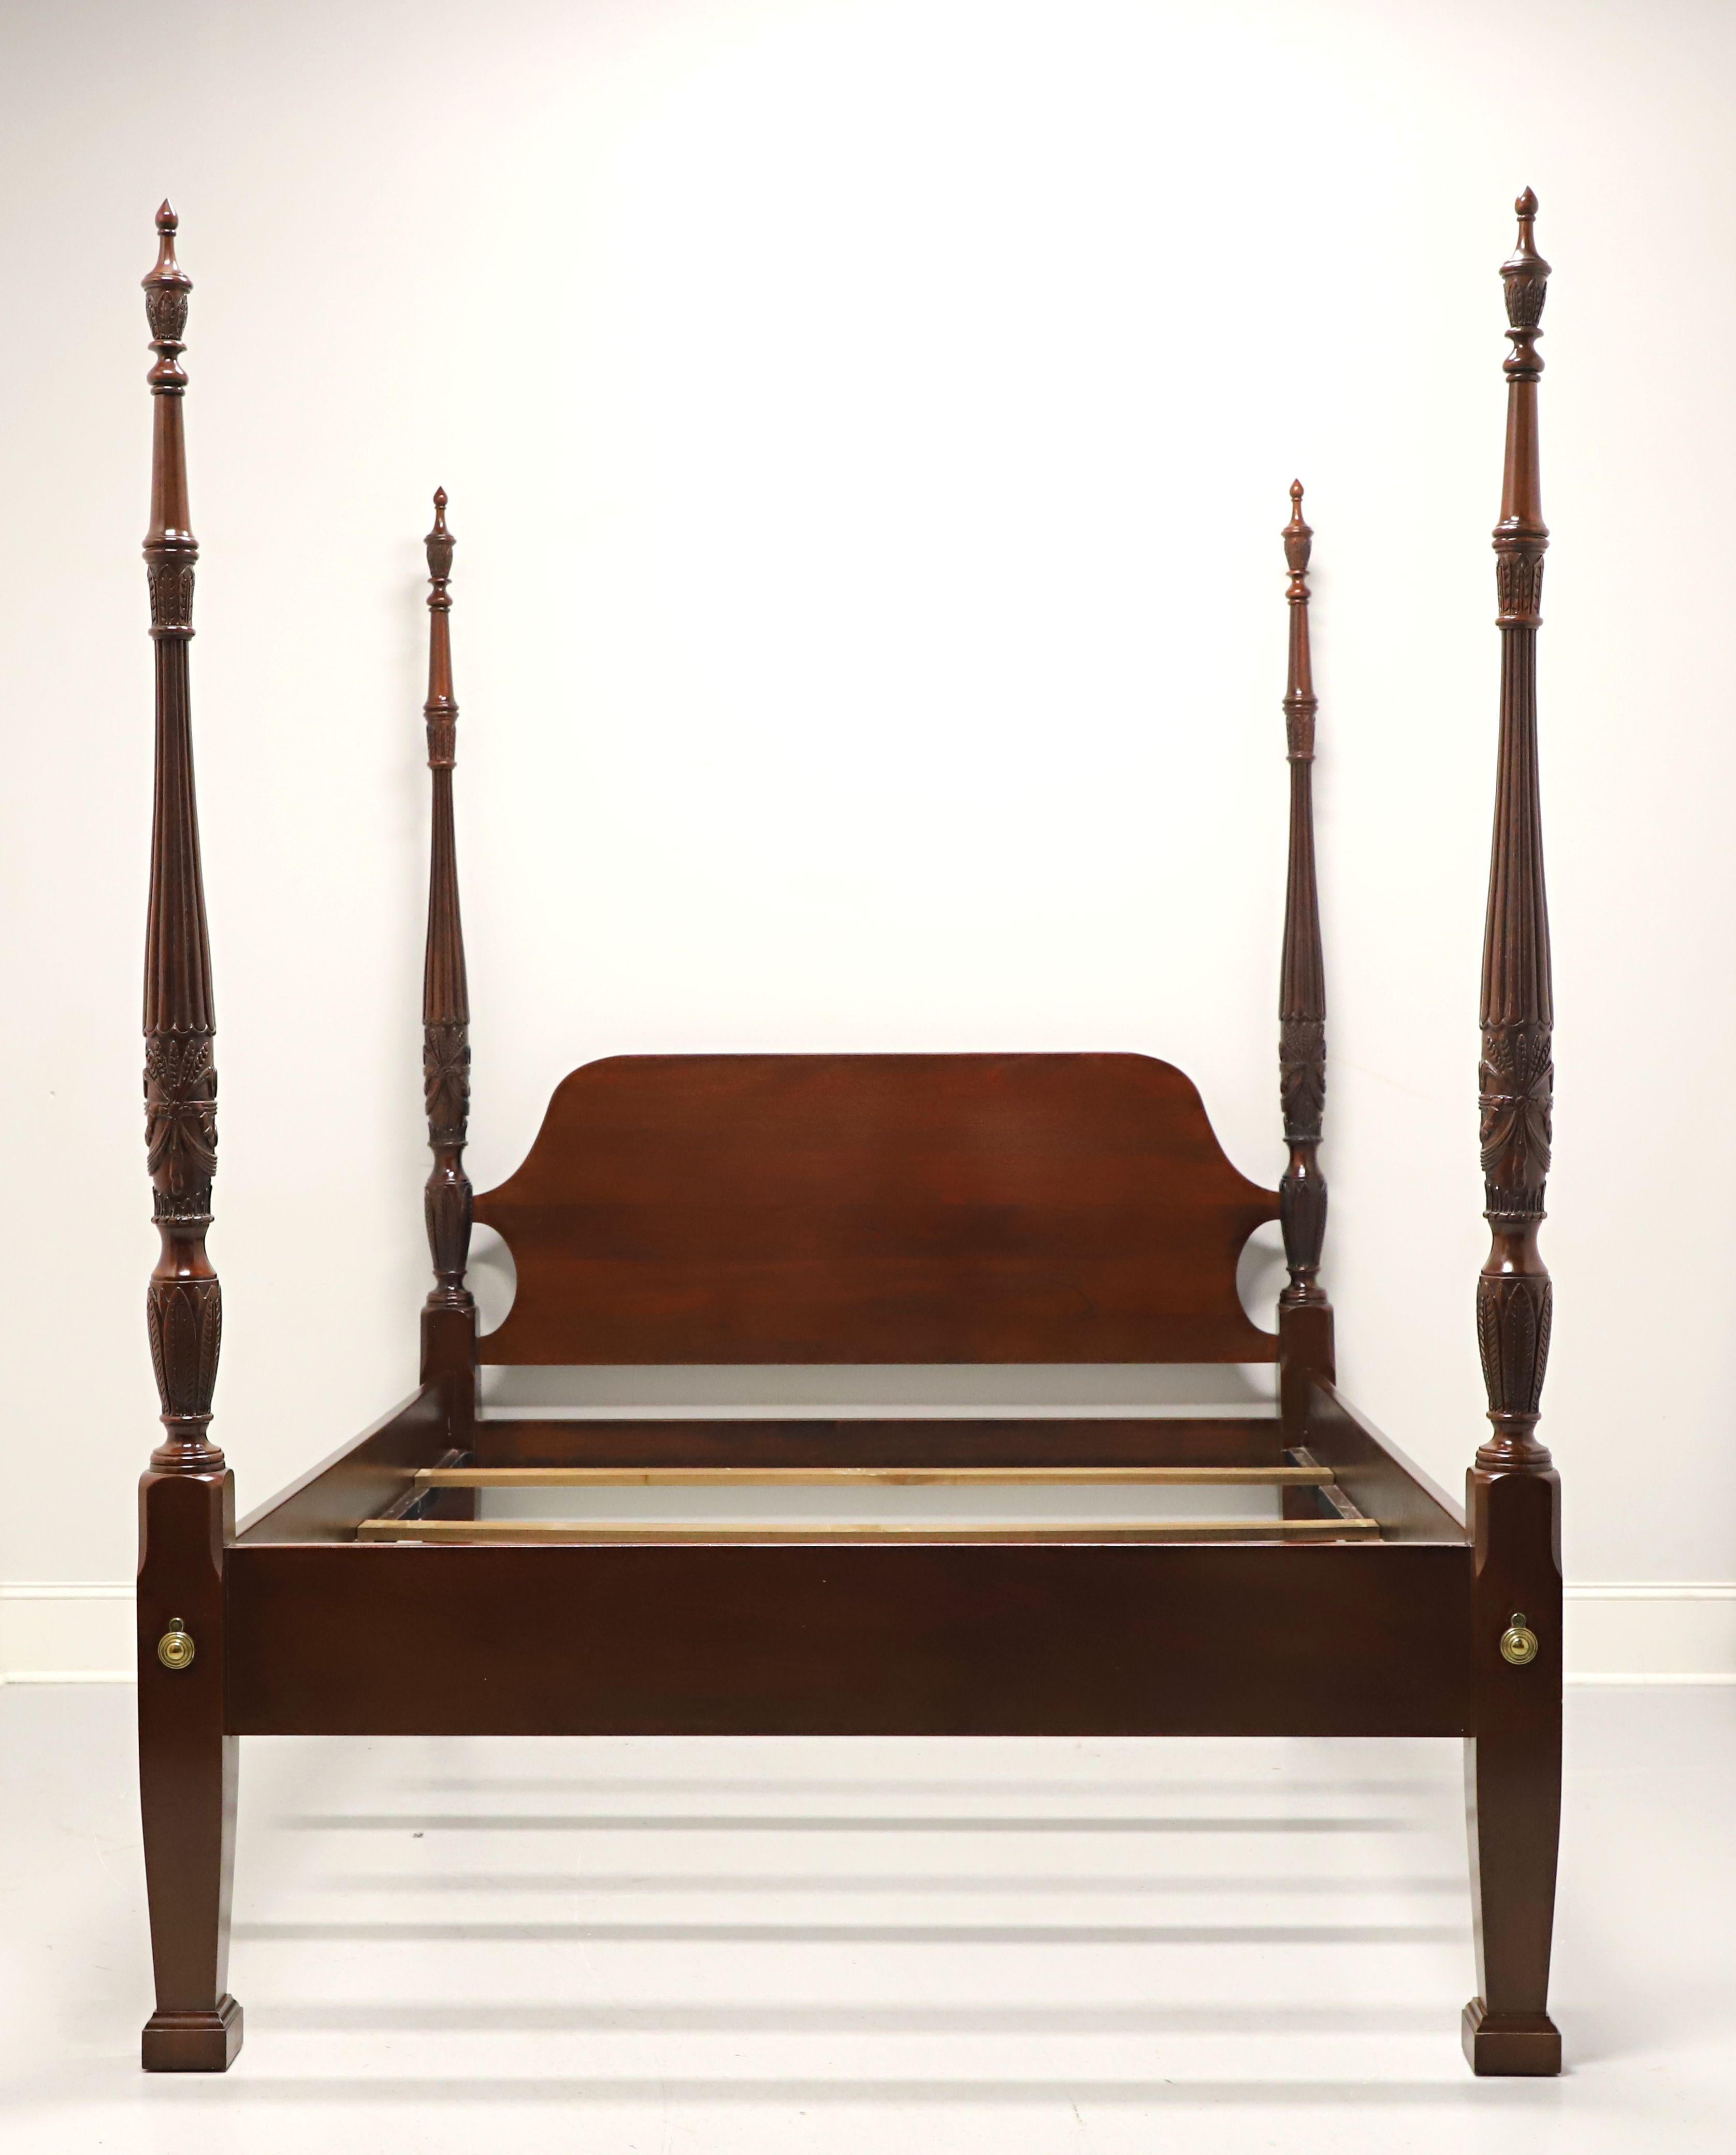 A Chippendale style queen size poster bed by Link-Taylor, from their Heirloom Gallery. Solid mahogany with arched headboard, low rail footboard, four rice carved posts with finials, brass hardware, bolt held side rails with wood bracers and three